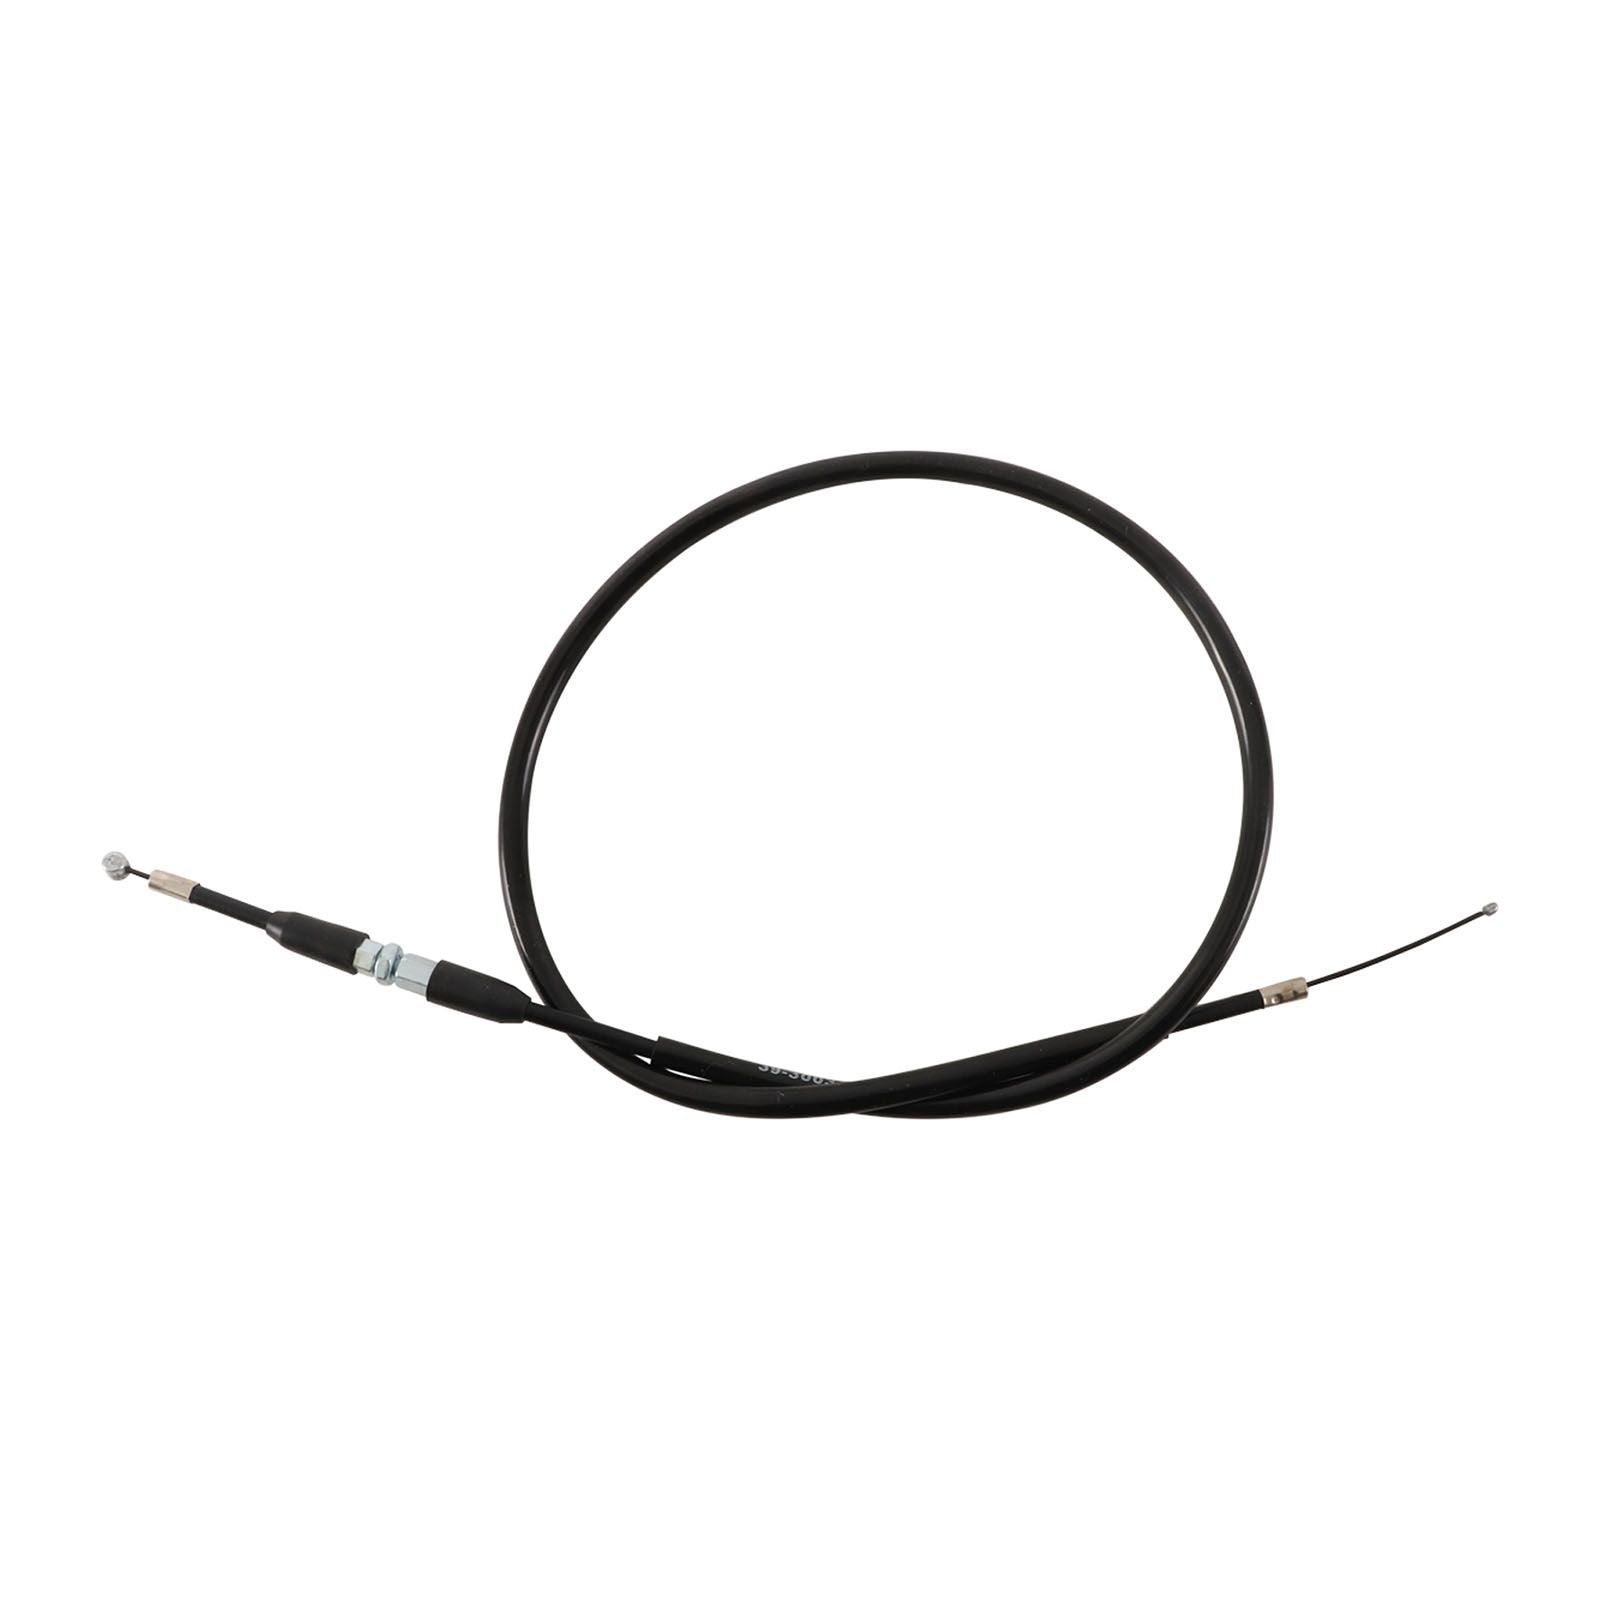 New ALL BALLS Racing Hot Start Cable #AB453004